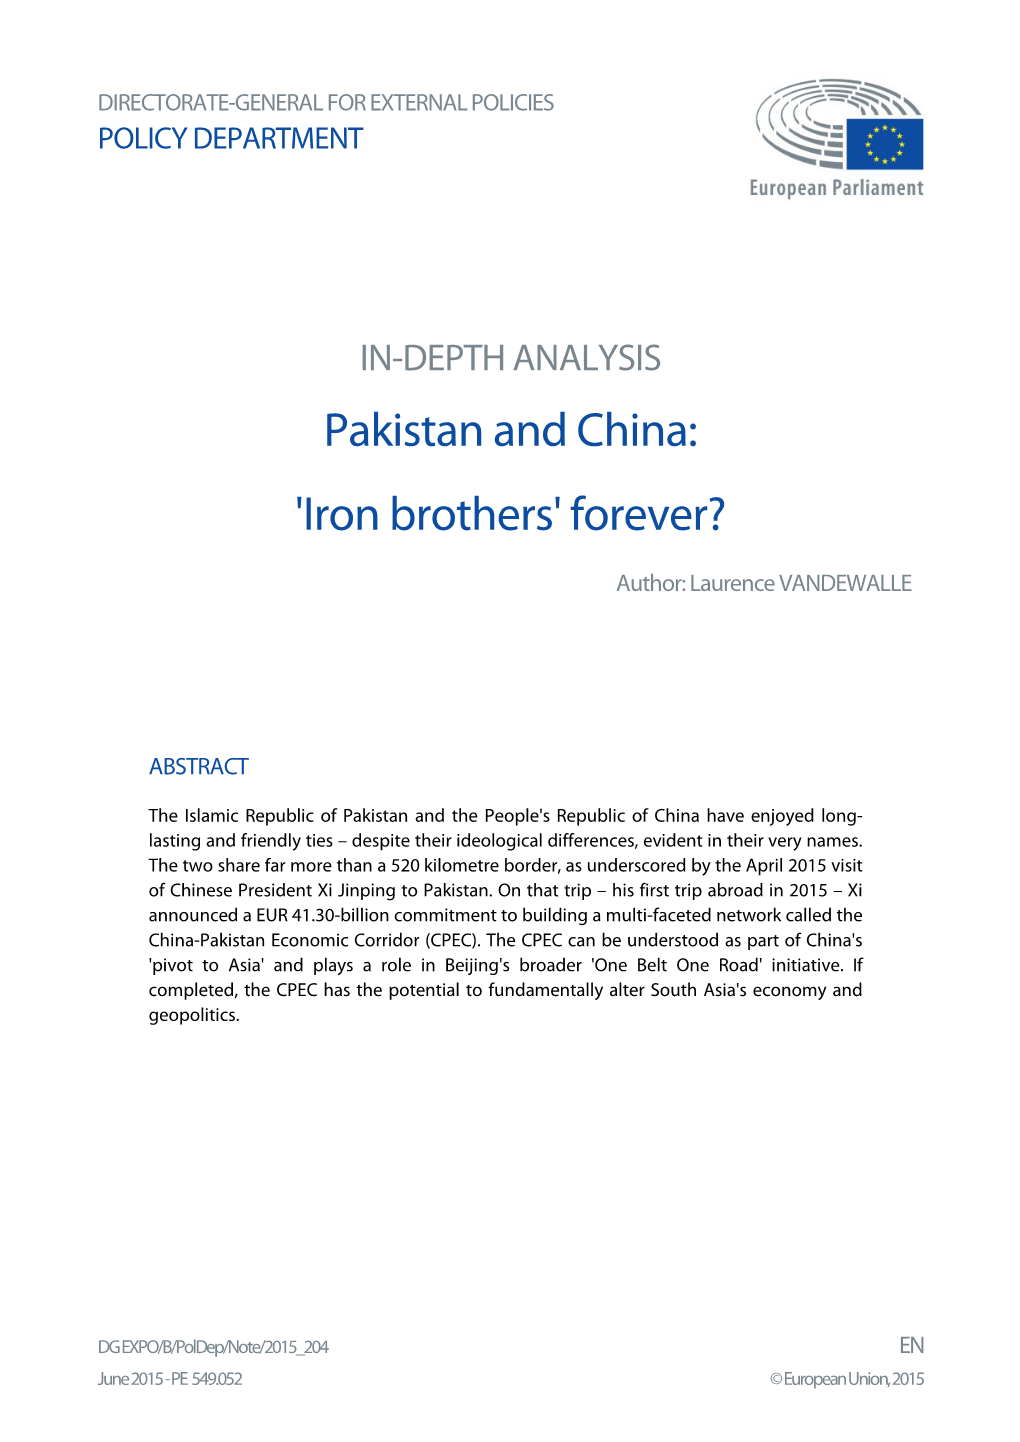 Pakistan and China: 'Iron Brothers' Forever?